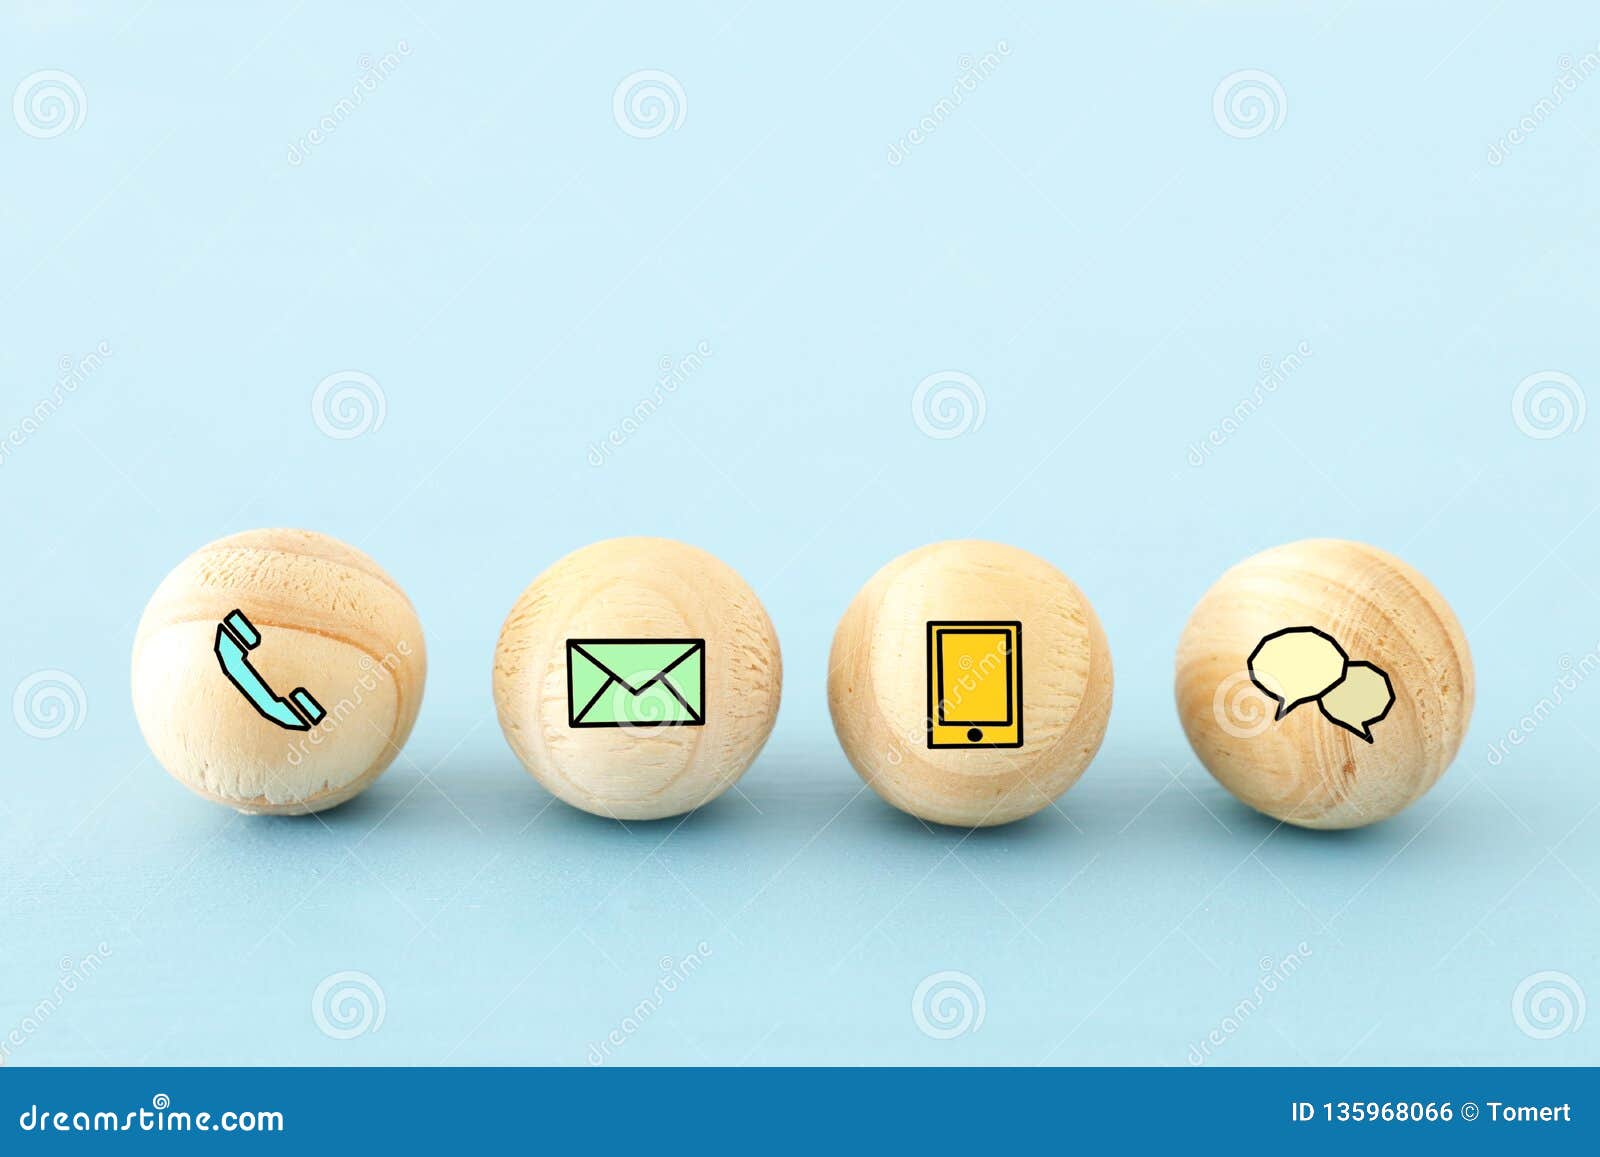 wooden bids with contact us icons.